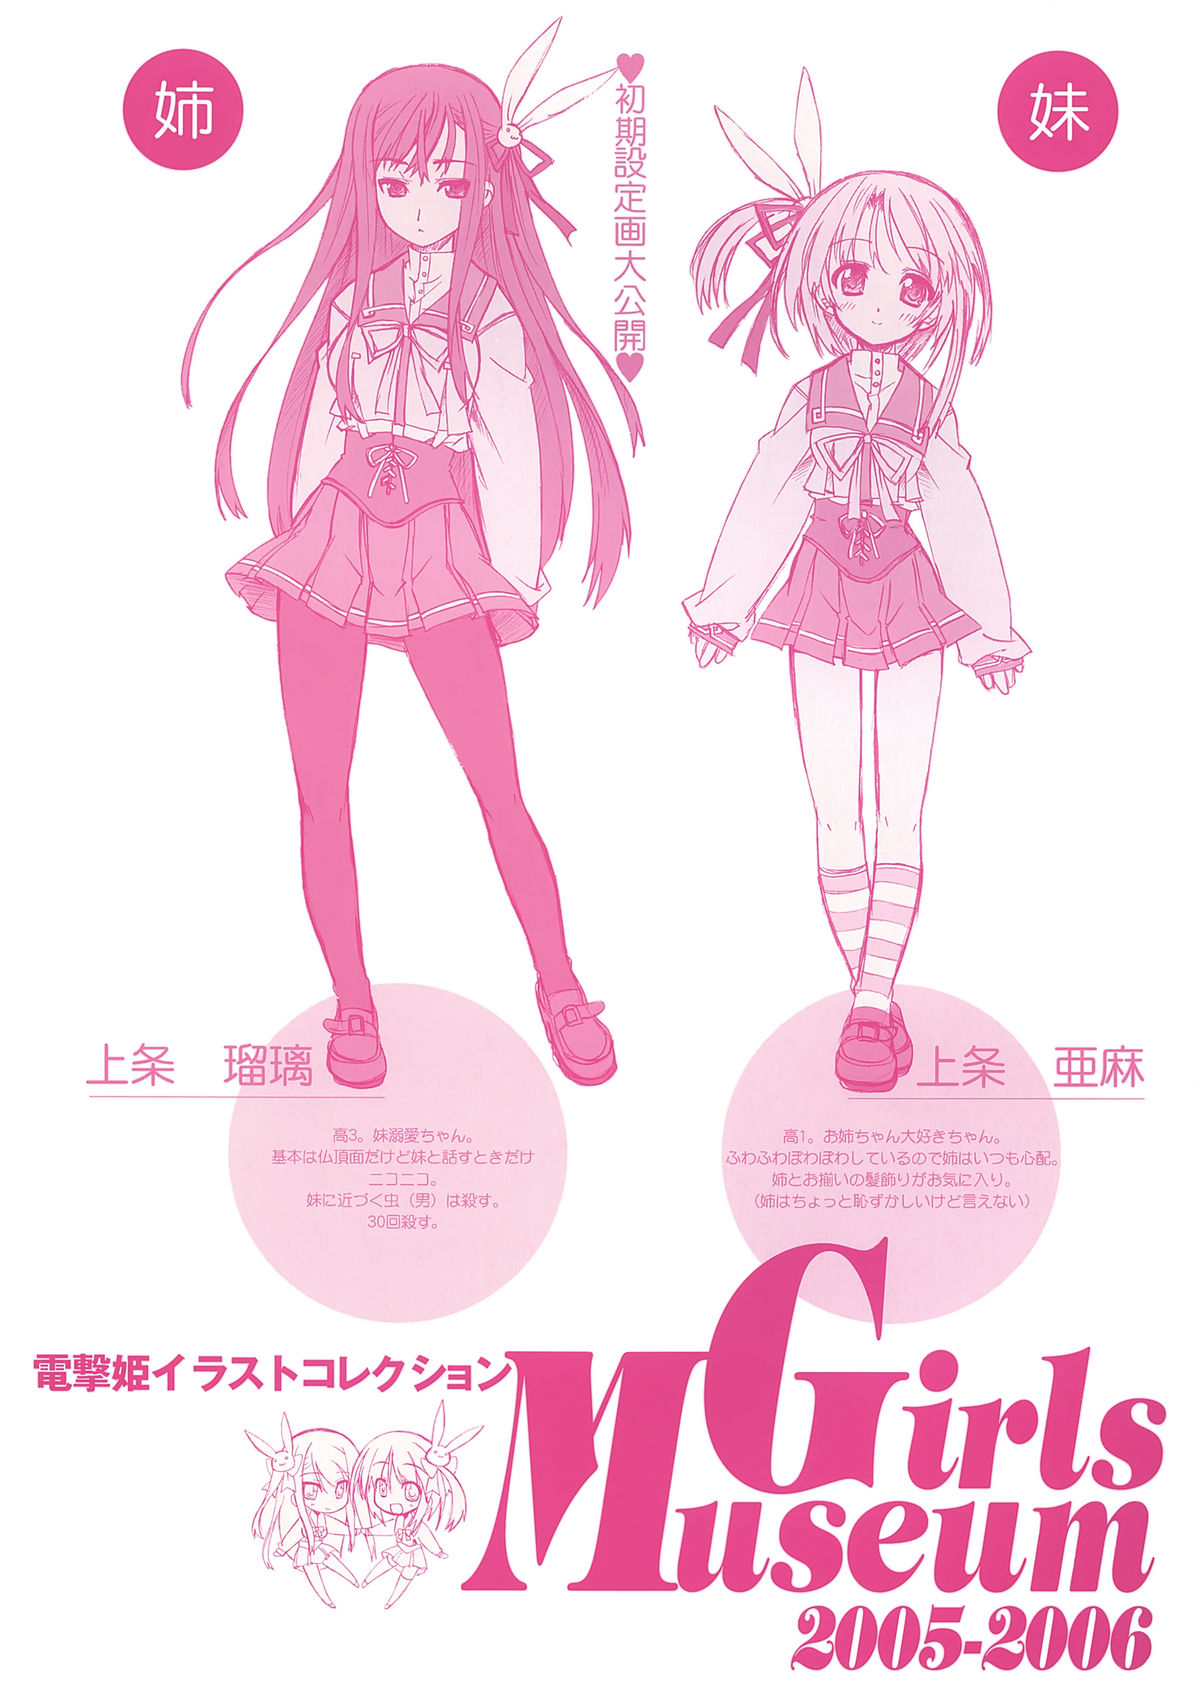 Dengeki-Hime Collection - Girls Museum 2005-2006 page 2 full